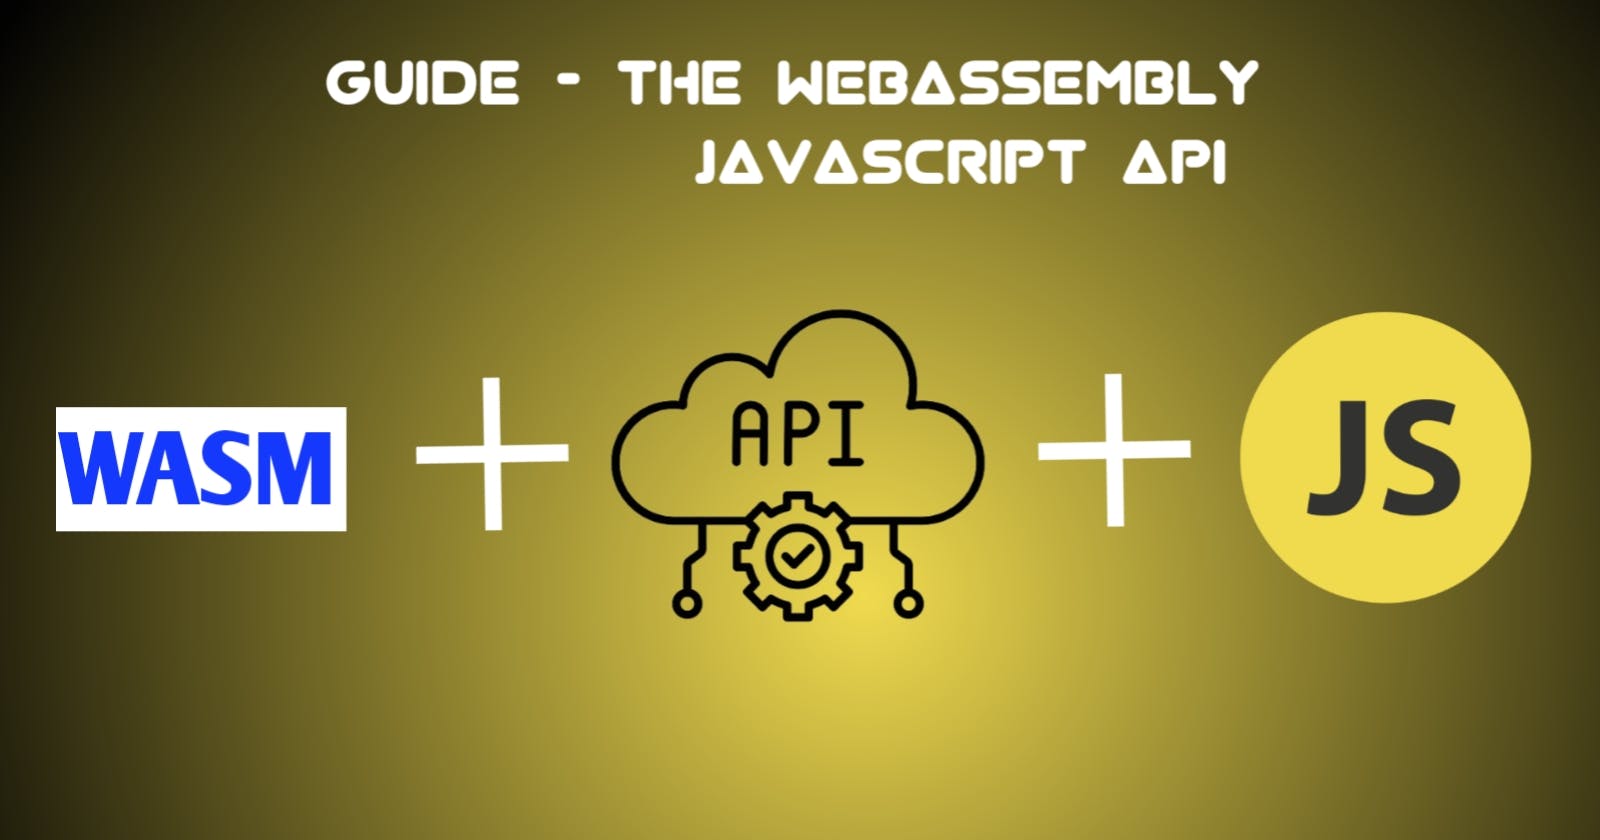 A Comprehensive Guide For The WebAssembly JavaScript API